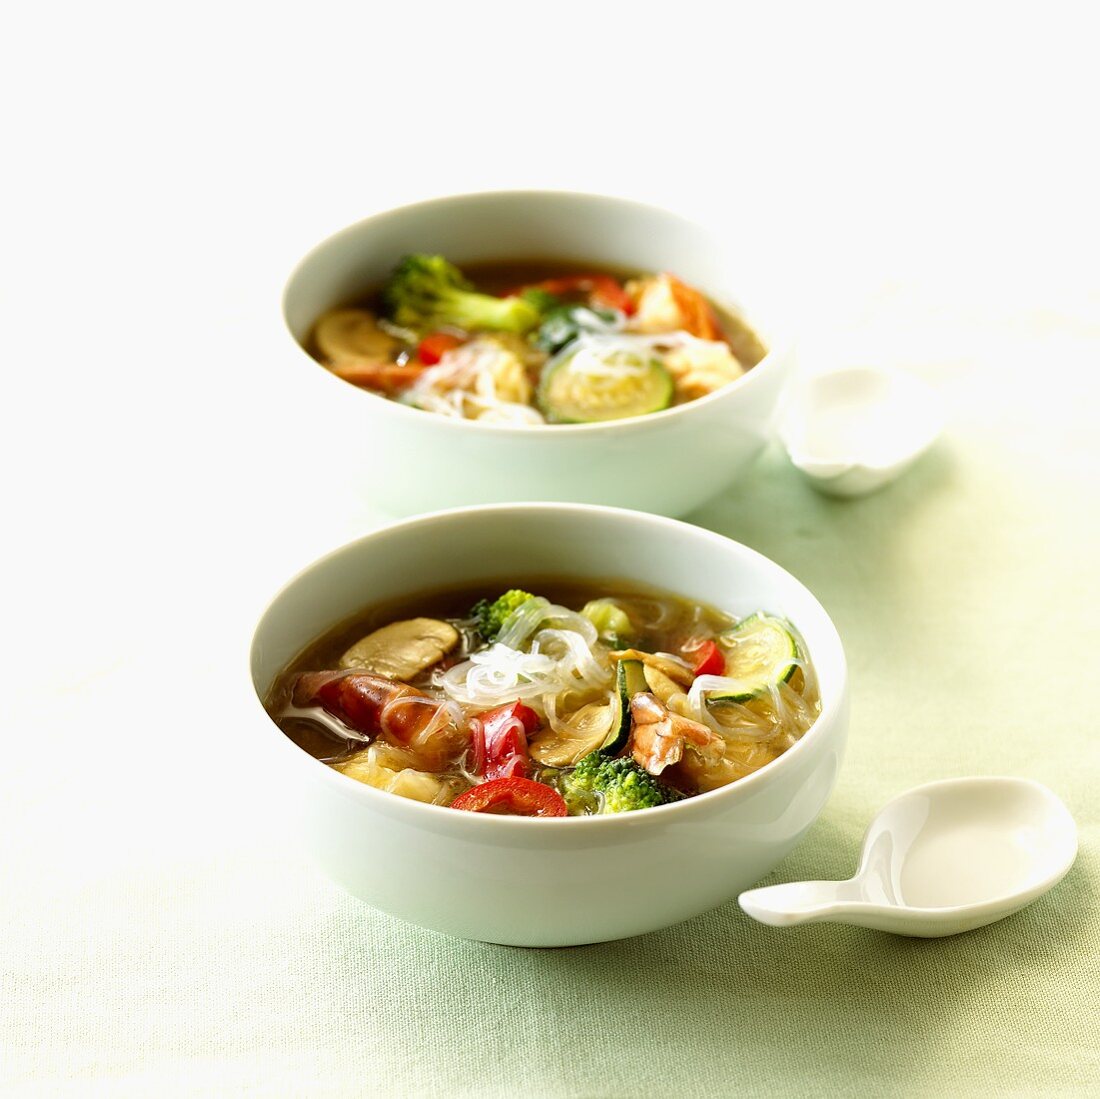 Two bowls of vegetable soup with prawns and glass noodles